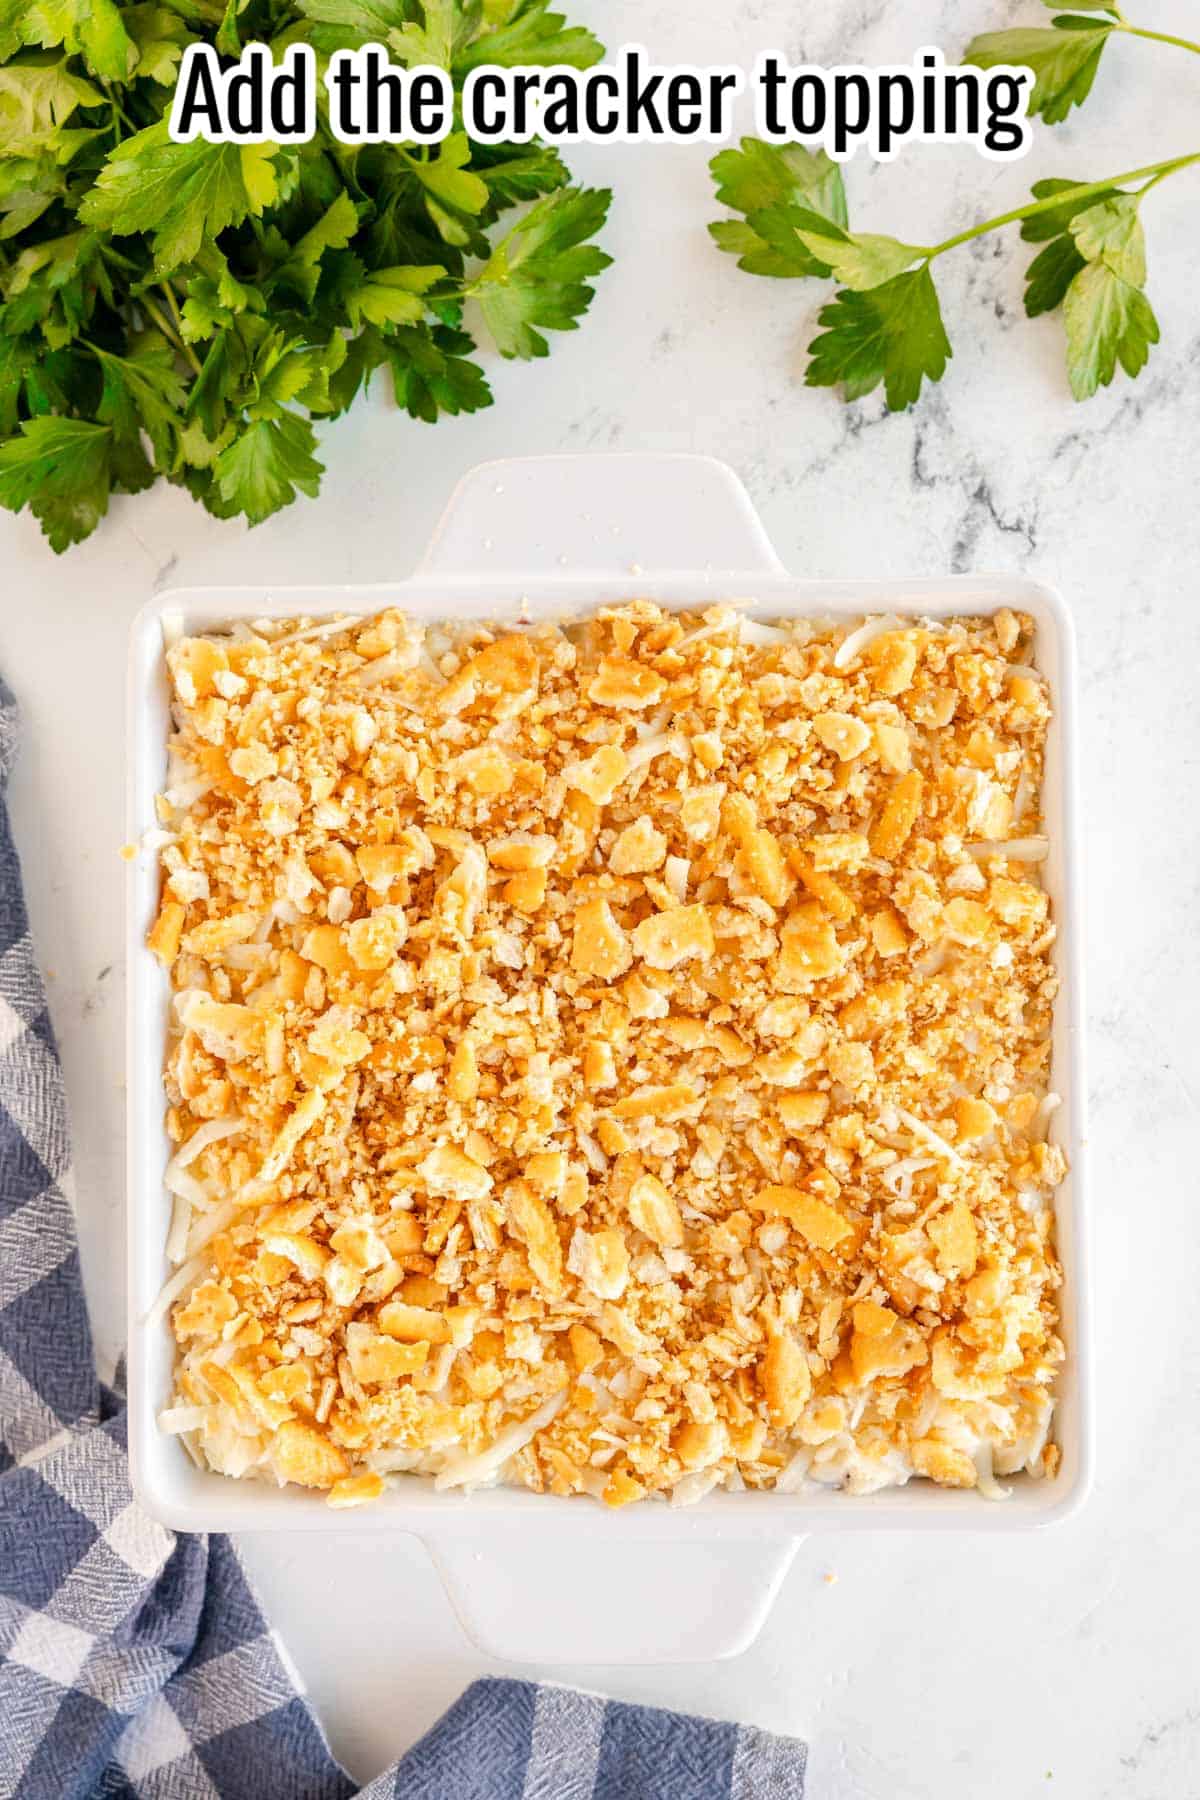 casserole dish with cracker topping.